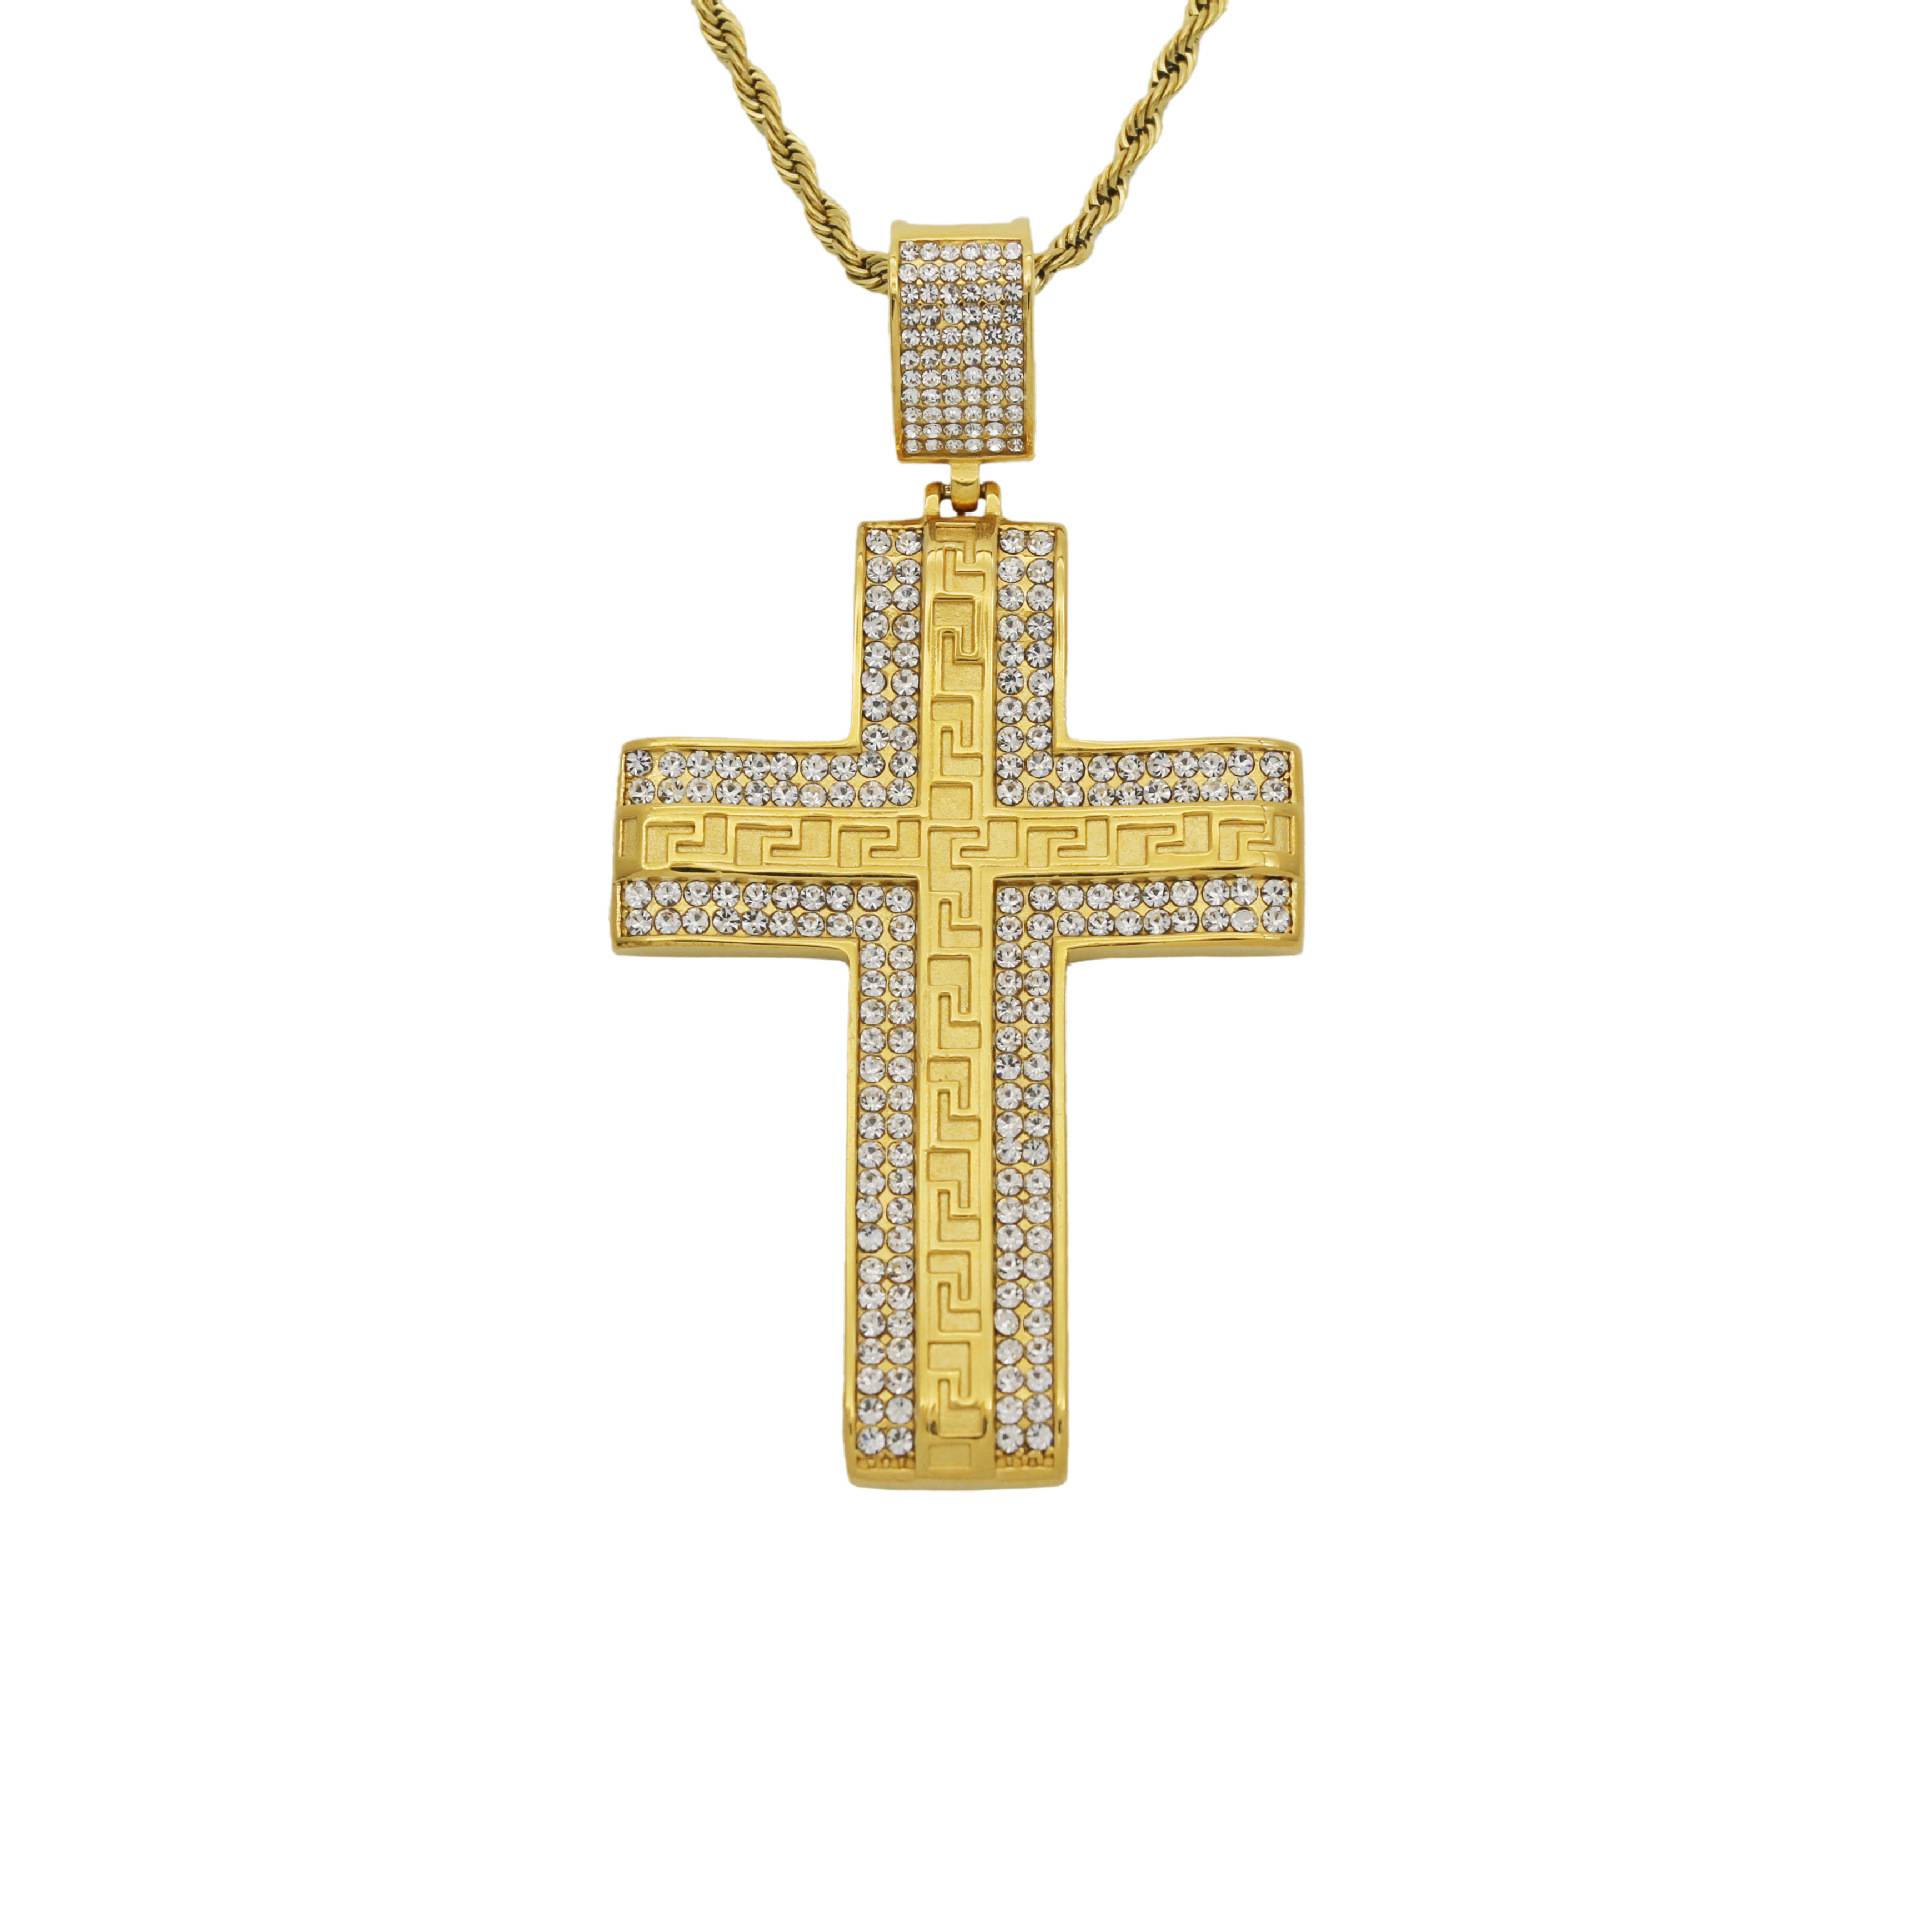 New Design Stainless Steel Christian Jesus Cross Pendant Necklace Jewelry Ice Out Bling Rhinestone Vintage Cross Crystal Pendant